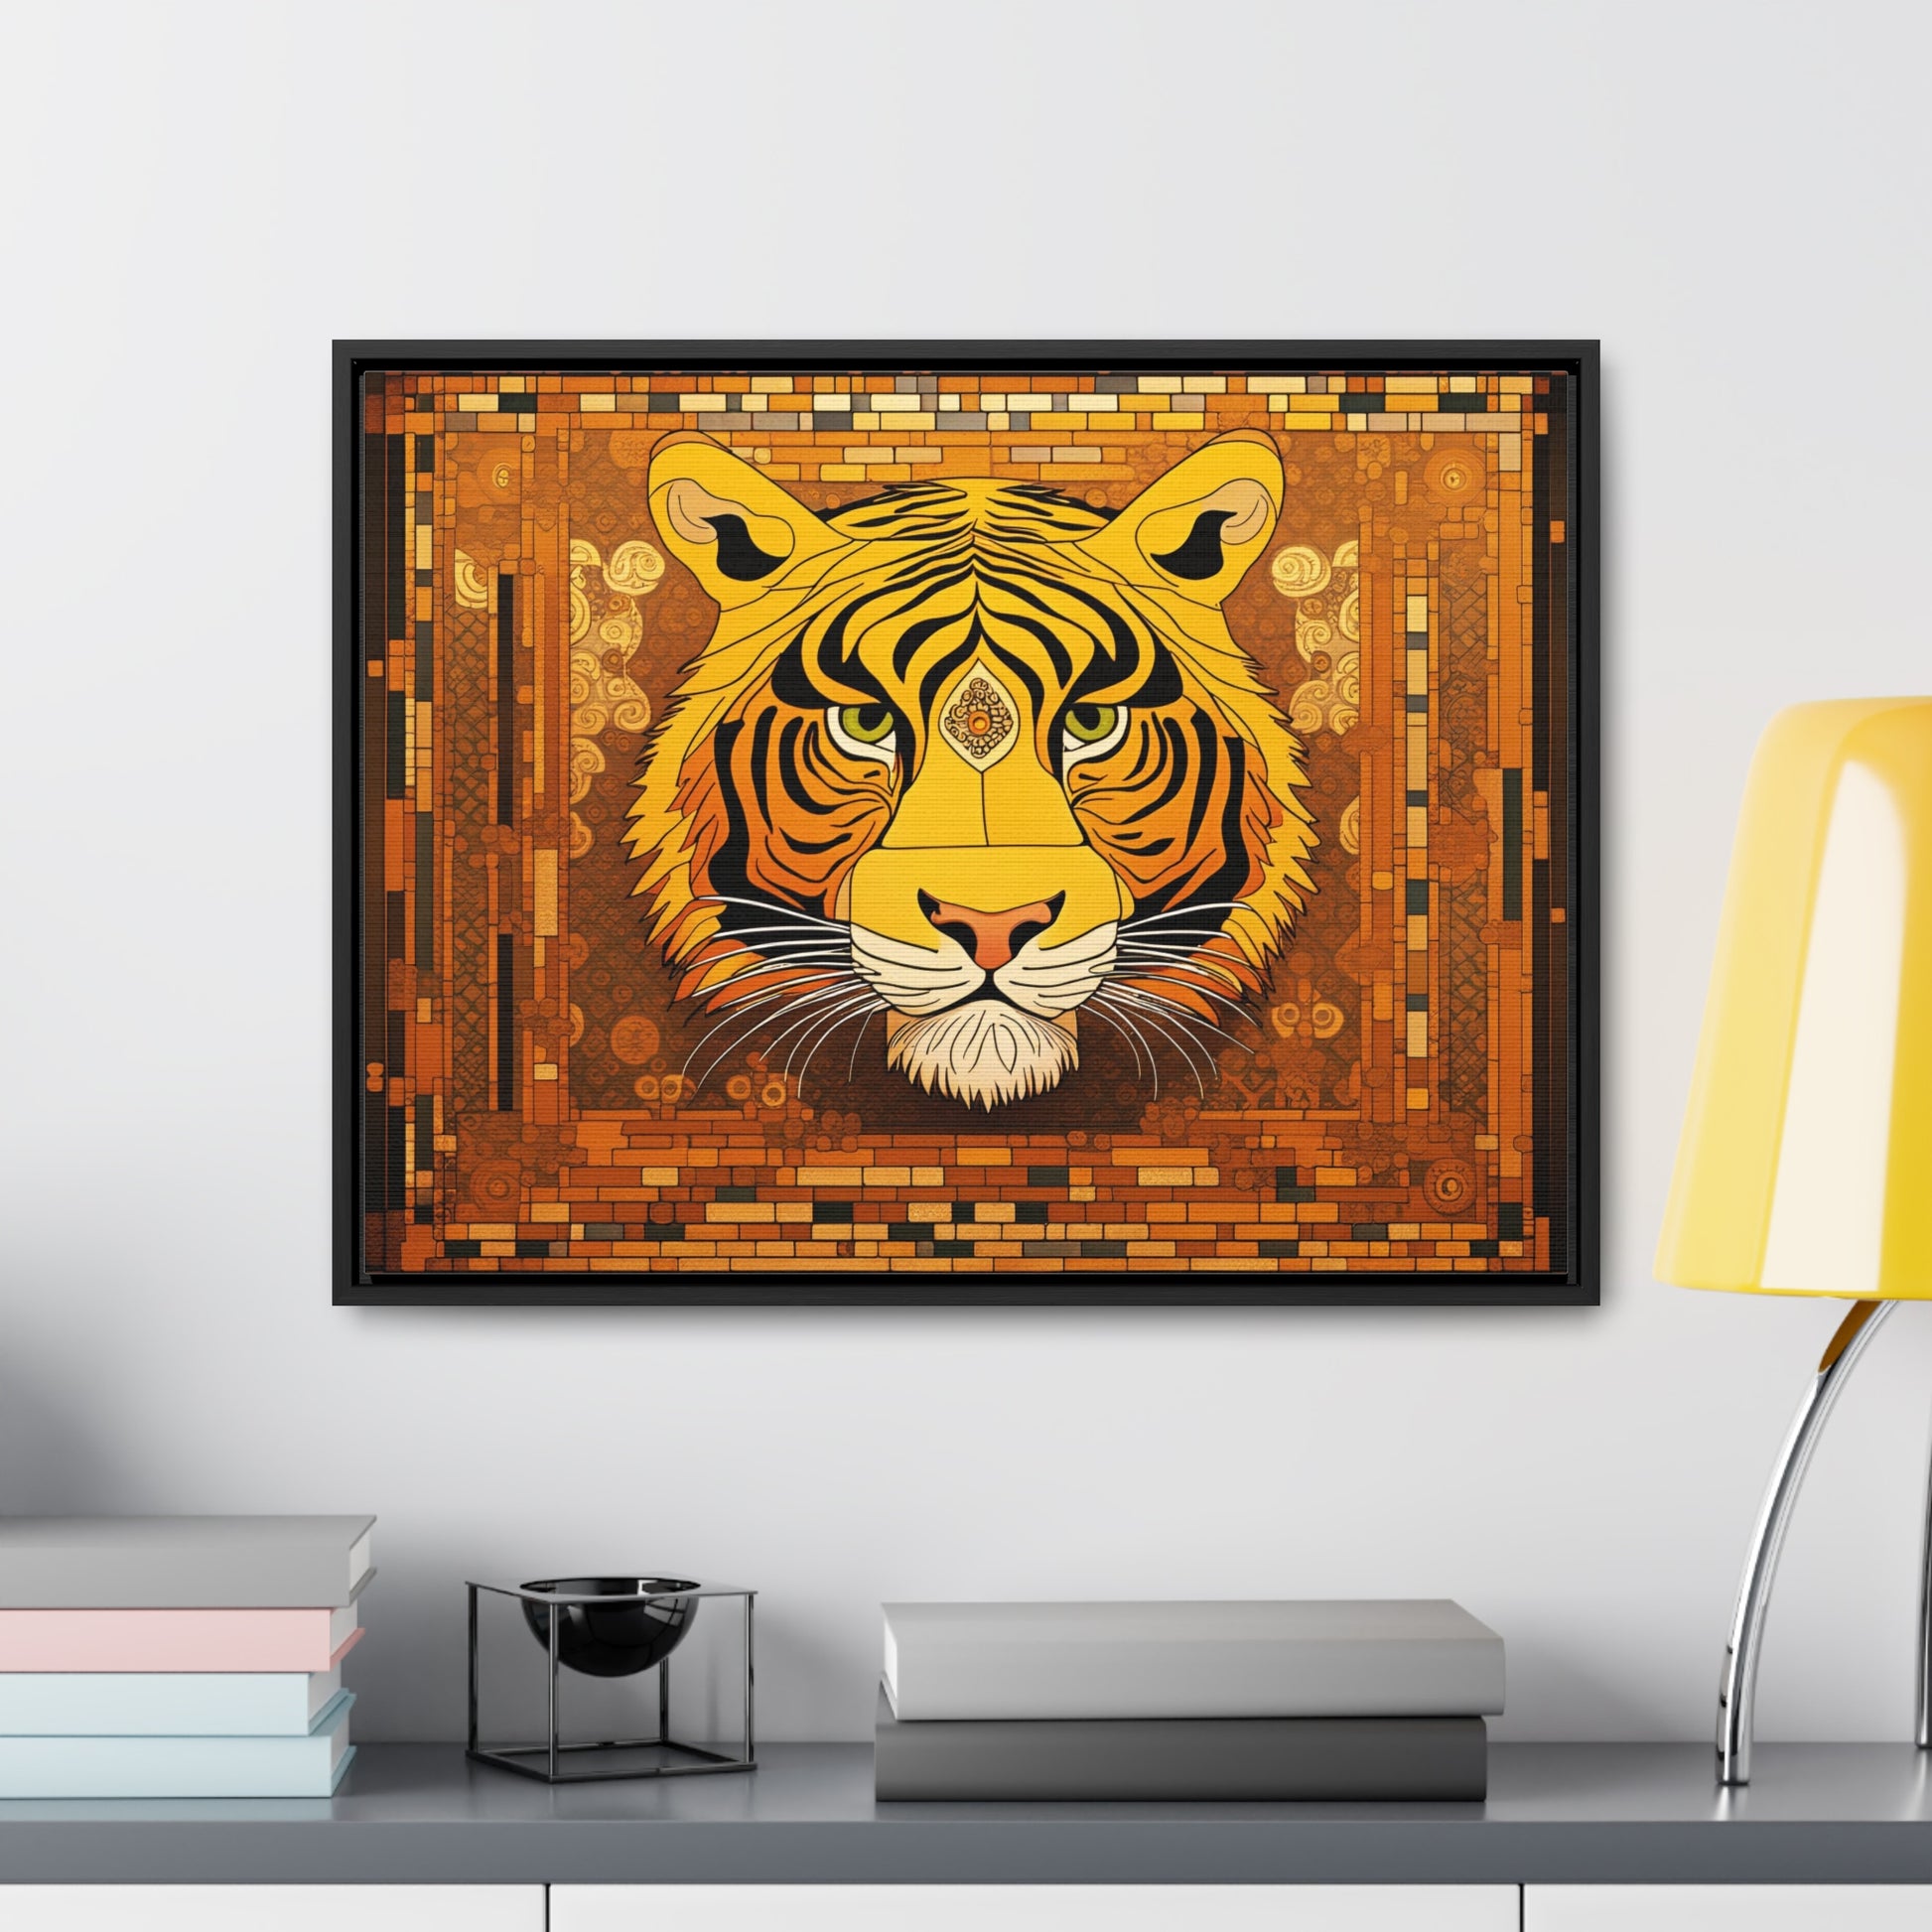 Tiger Head in the Style of Gustav Klimt Print on Canvas in a Floating Frame 24x18 hung